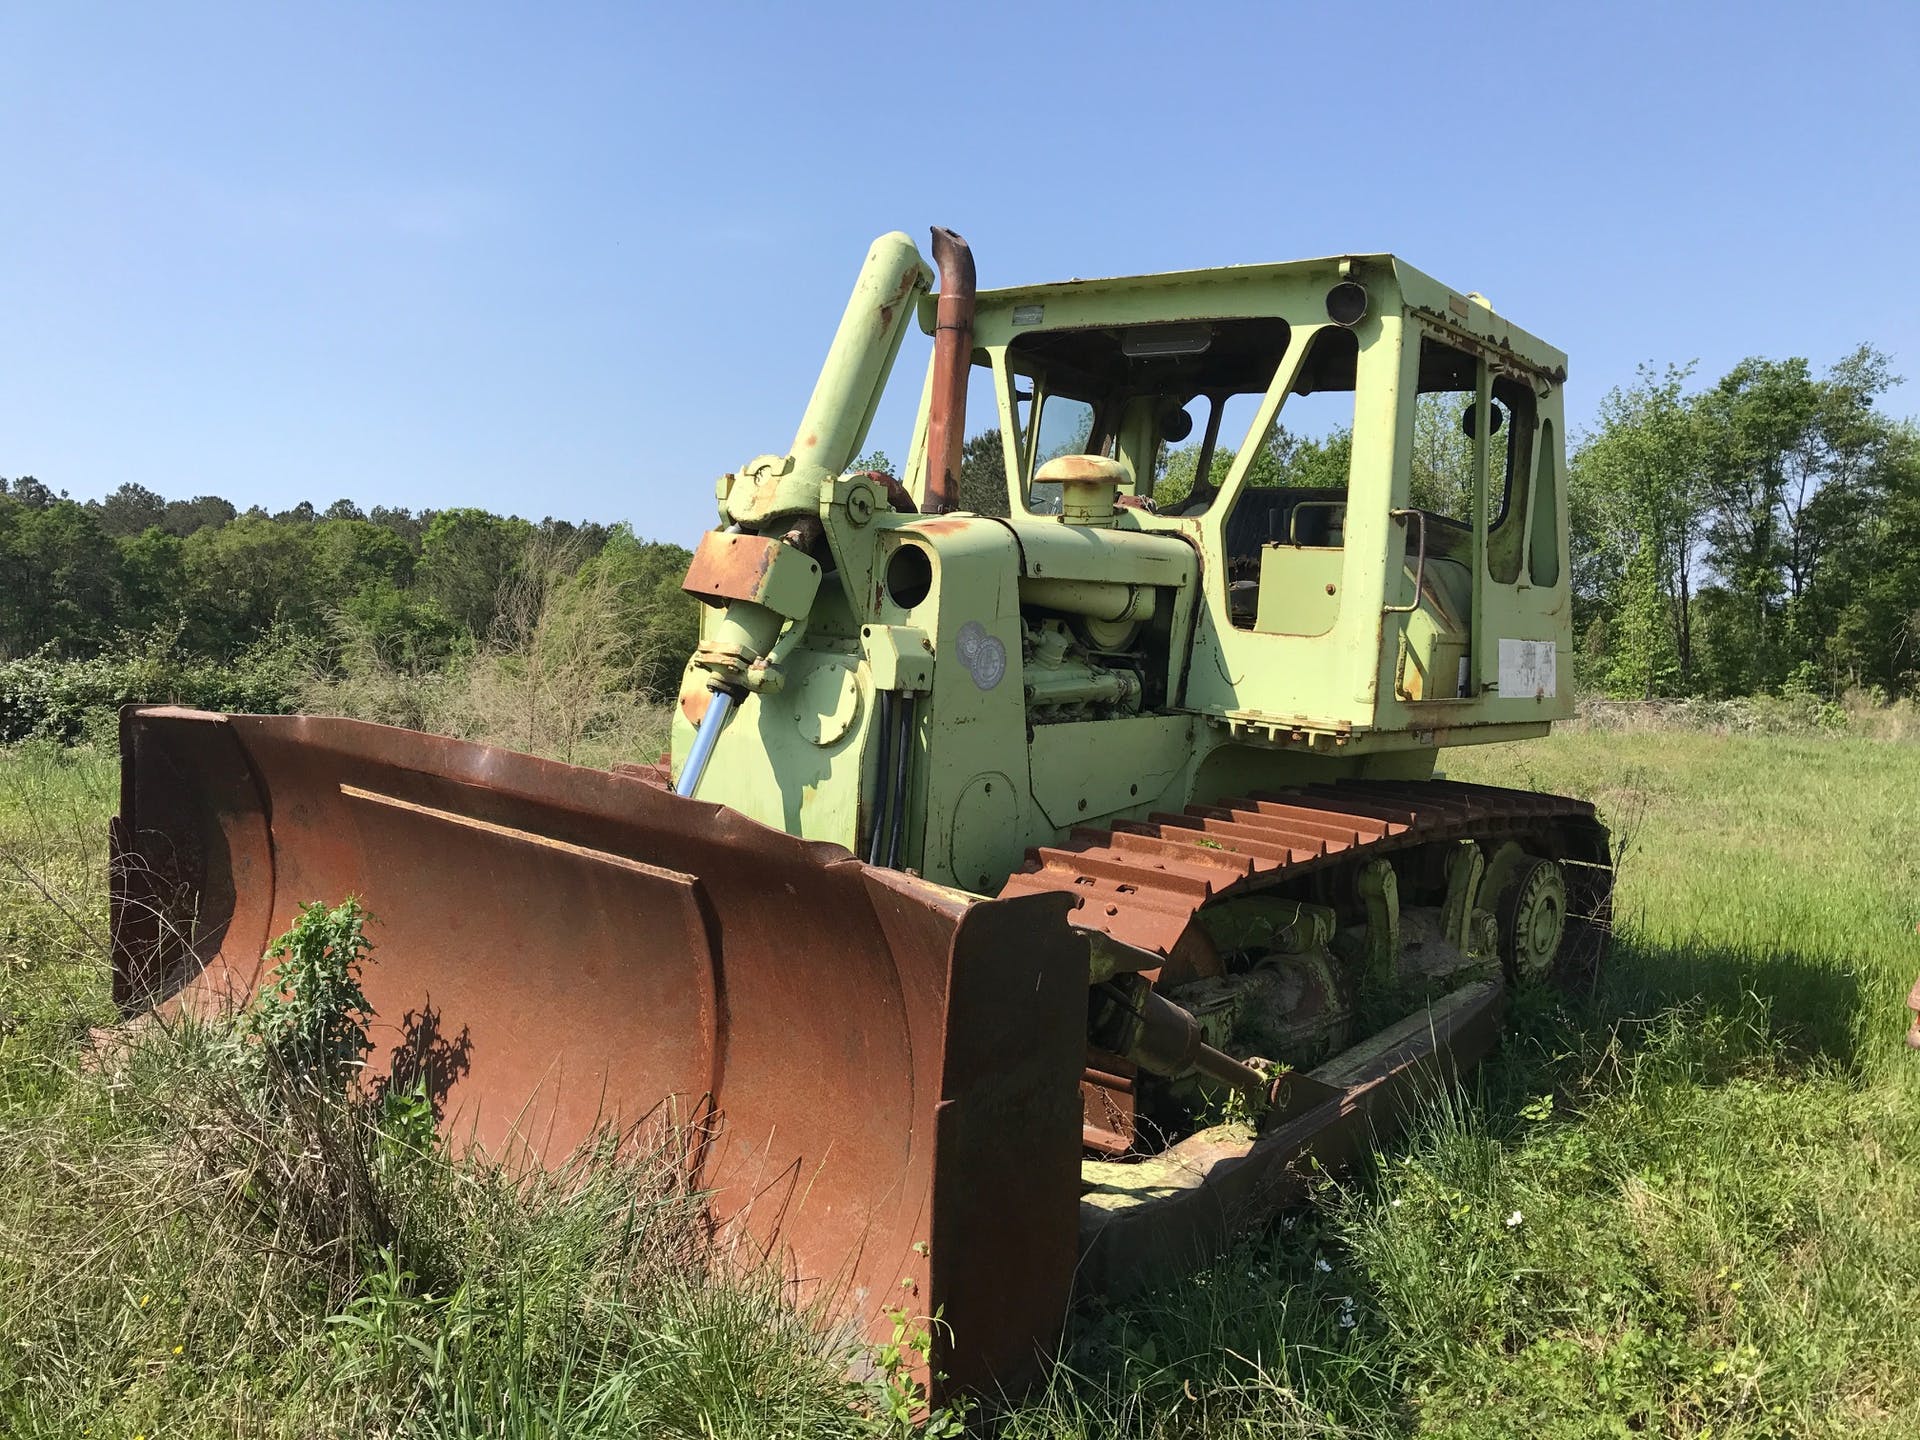 1982/3 Terex D700A dozer before restoration rusted and in weeds